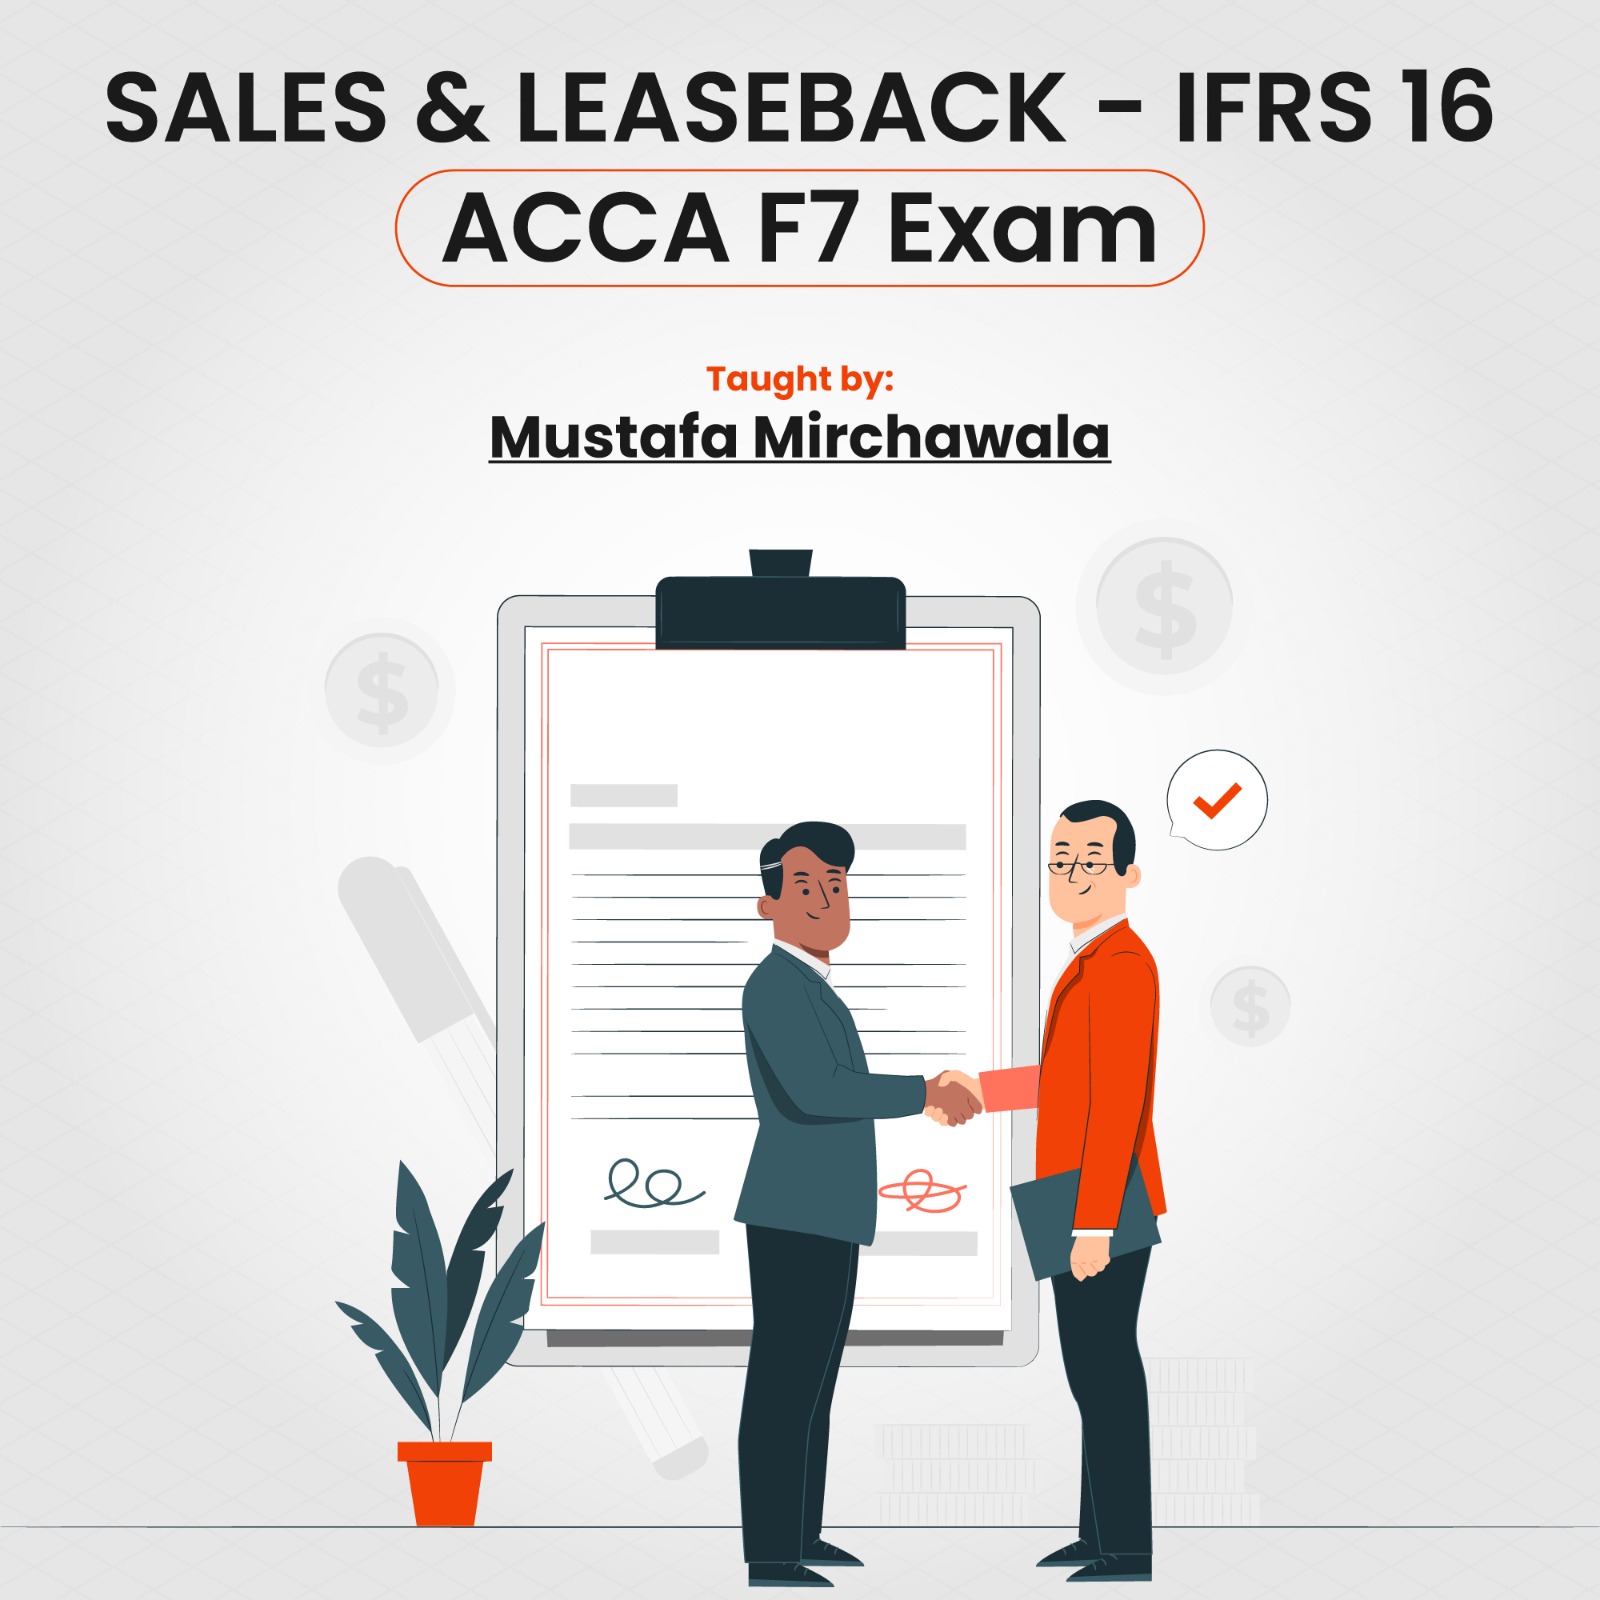 “Optimize Your Strategies: Sale & Leaseback under IFRS 16 – ACCA Financial Reporting”